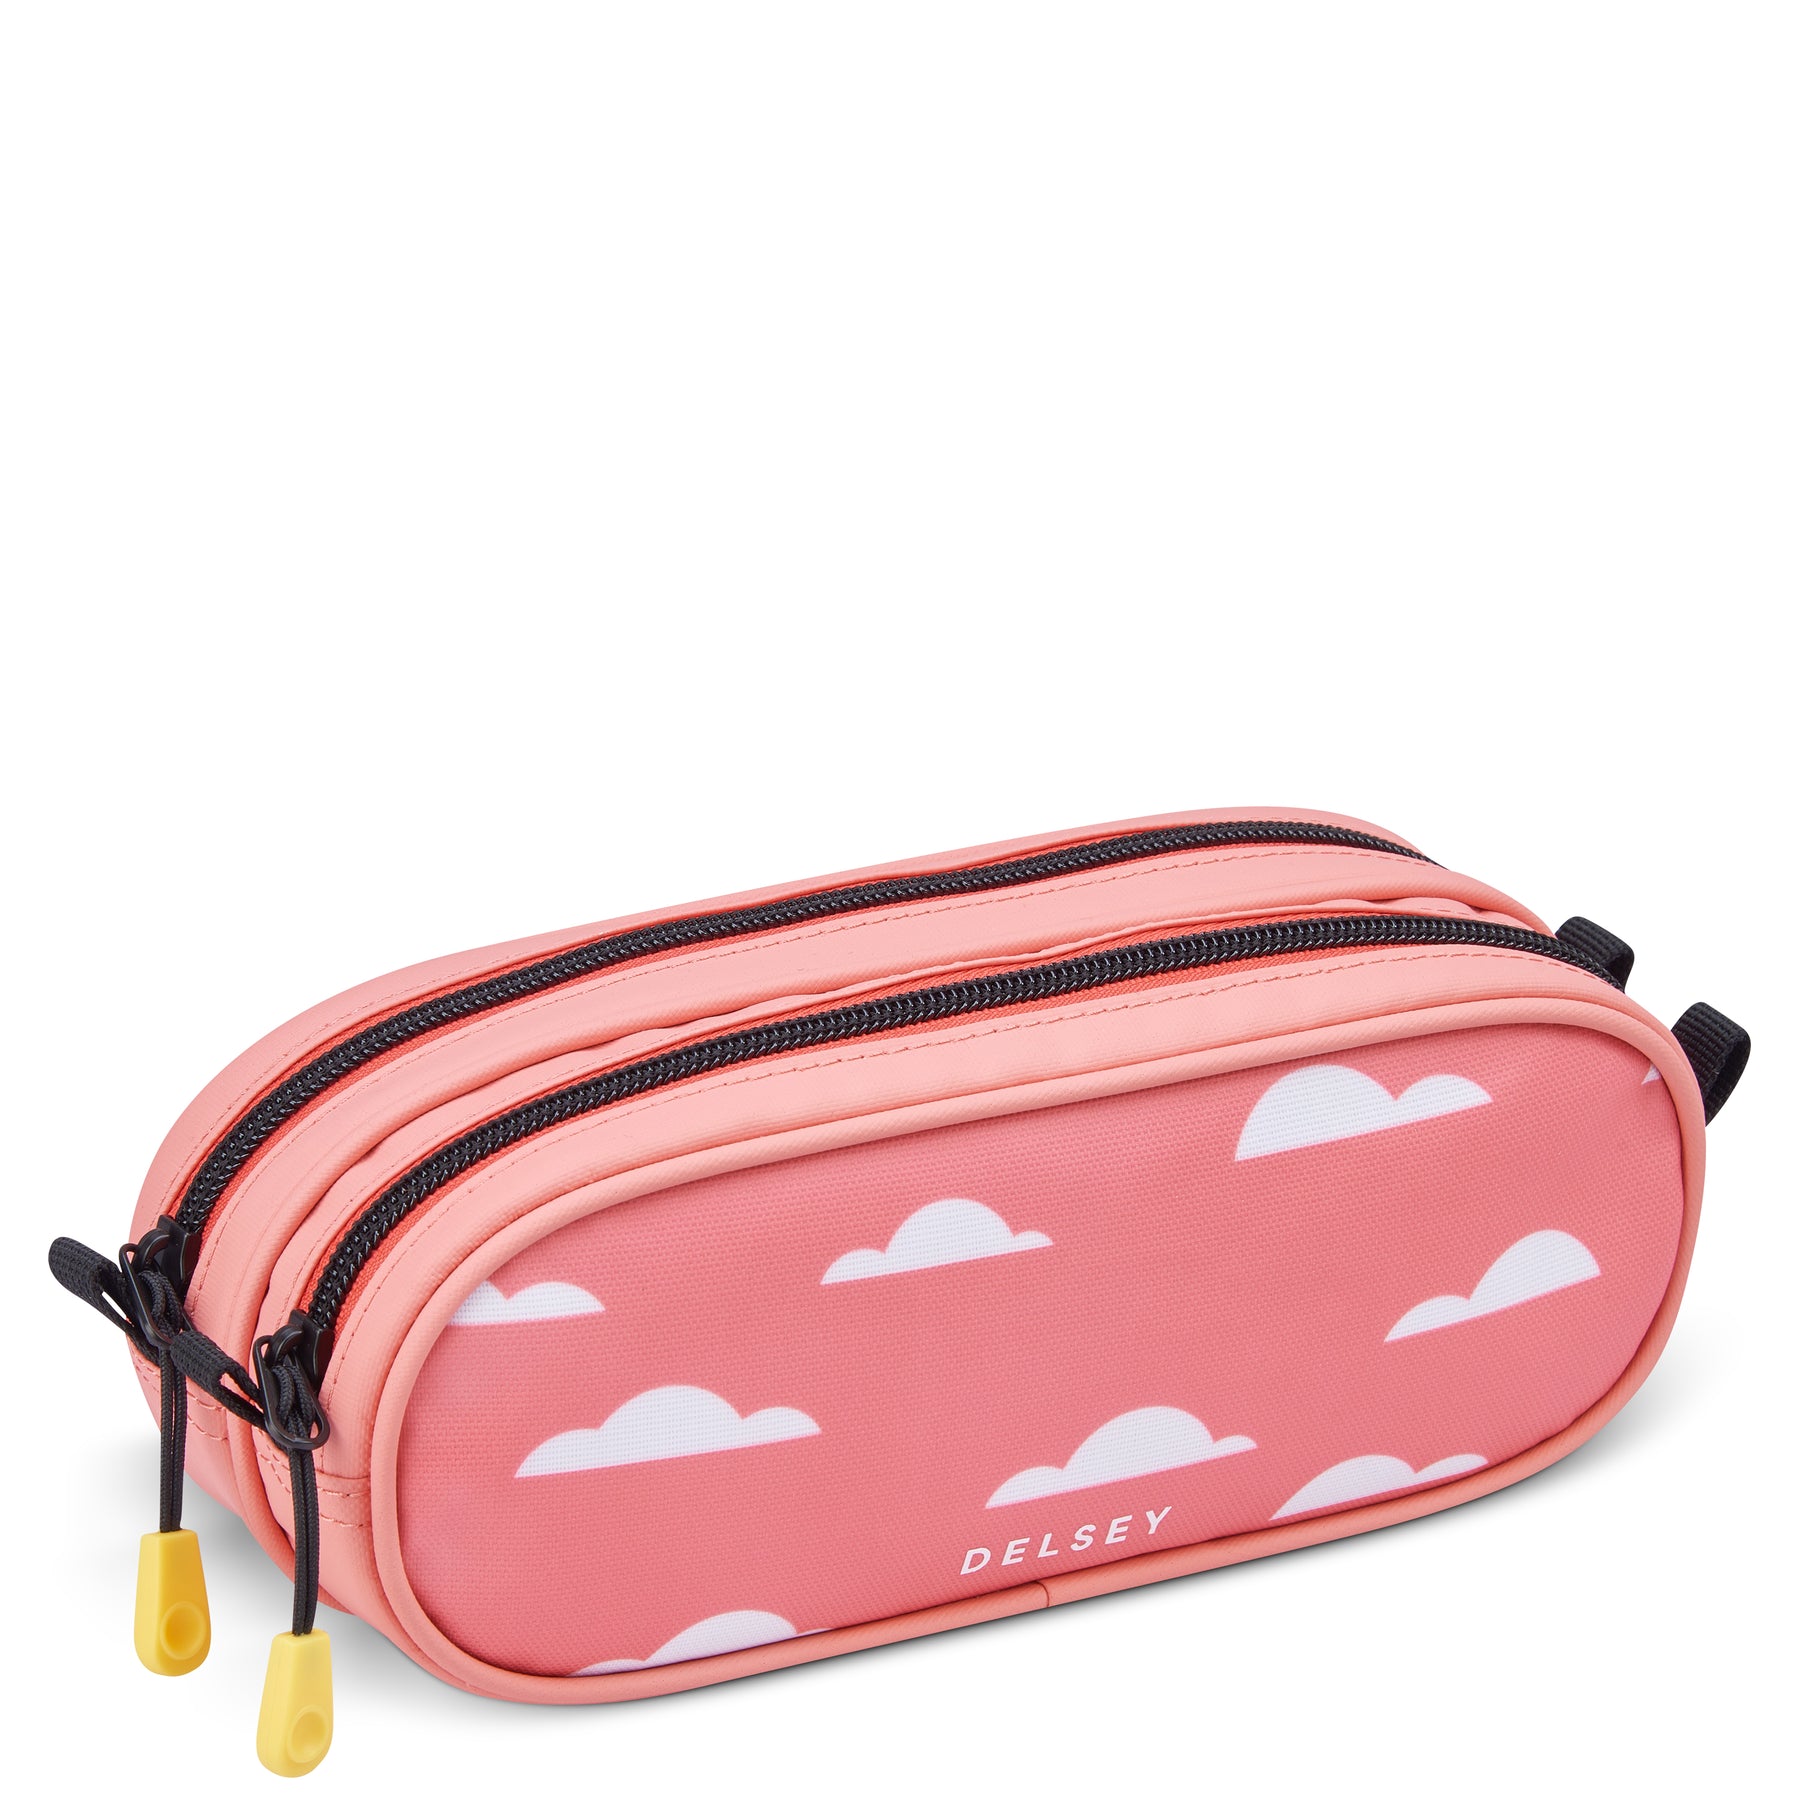 Buy BTS Theme Pencil Stationery Pouch - 1 Pcs Online at Low Prices in India  - Amazon.in